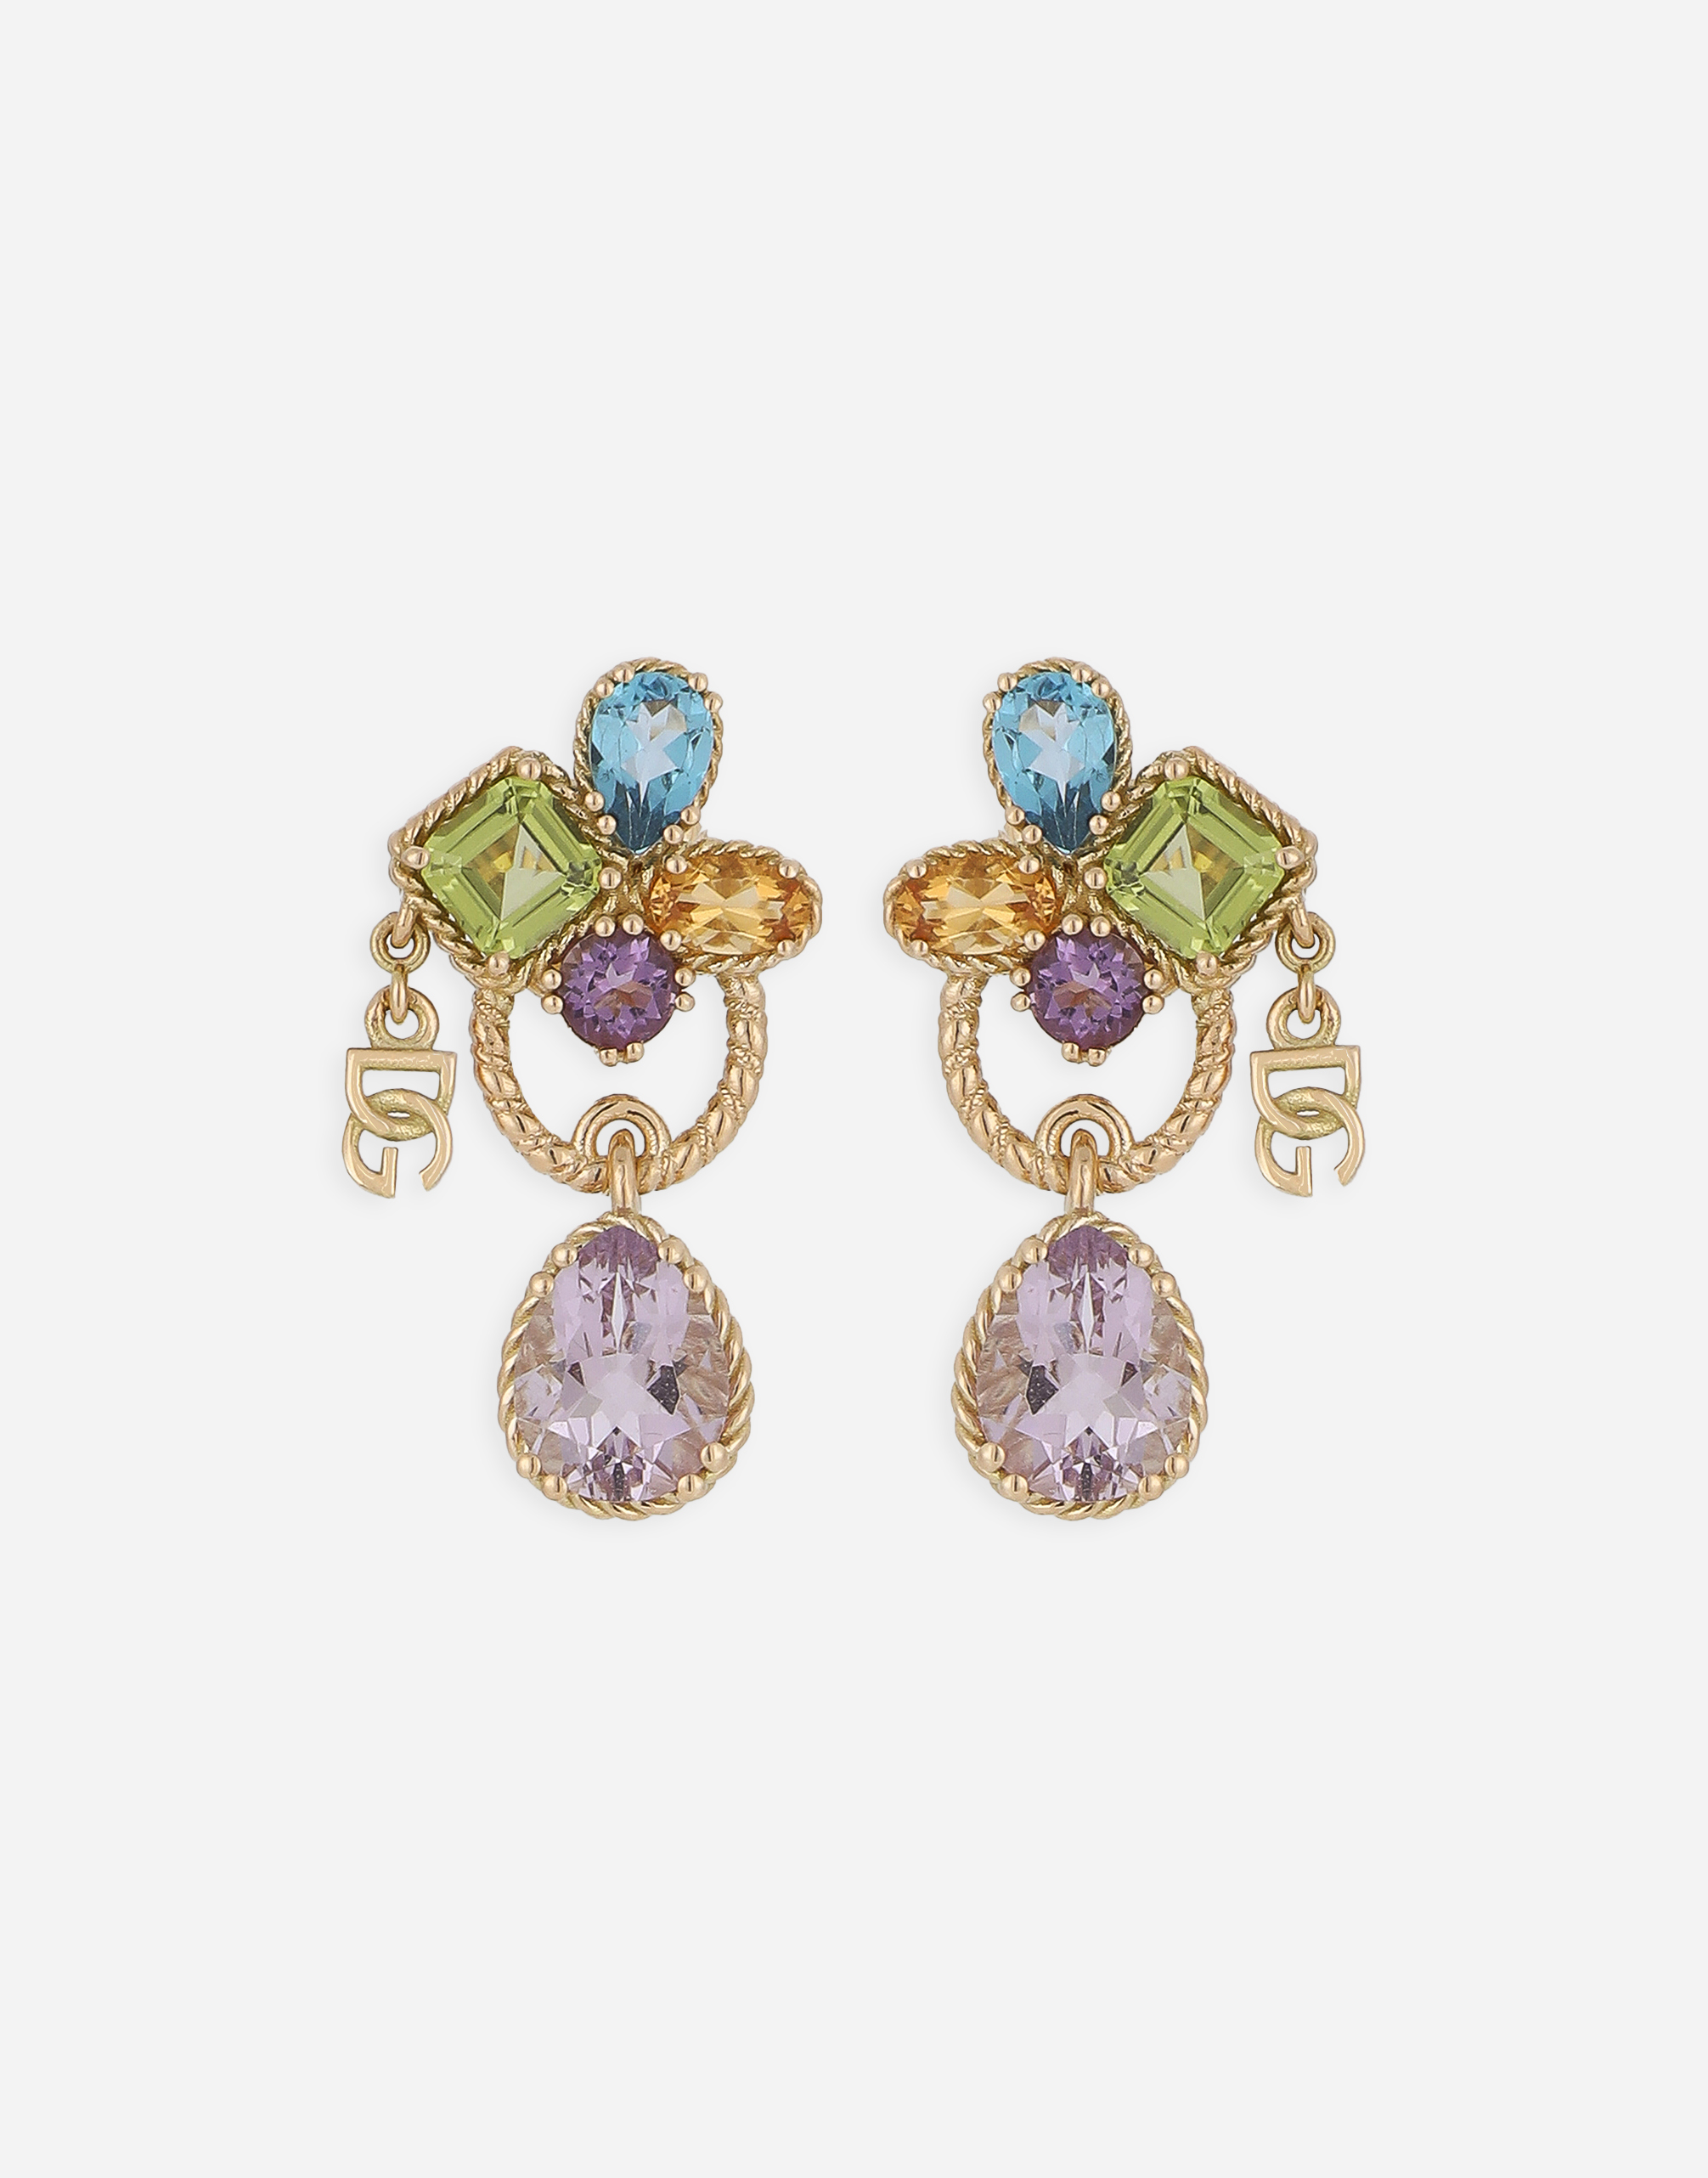 Dolce & Gabbana 18kt Yellow Gold Pierced Earrings Withmulticolors Gemstones